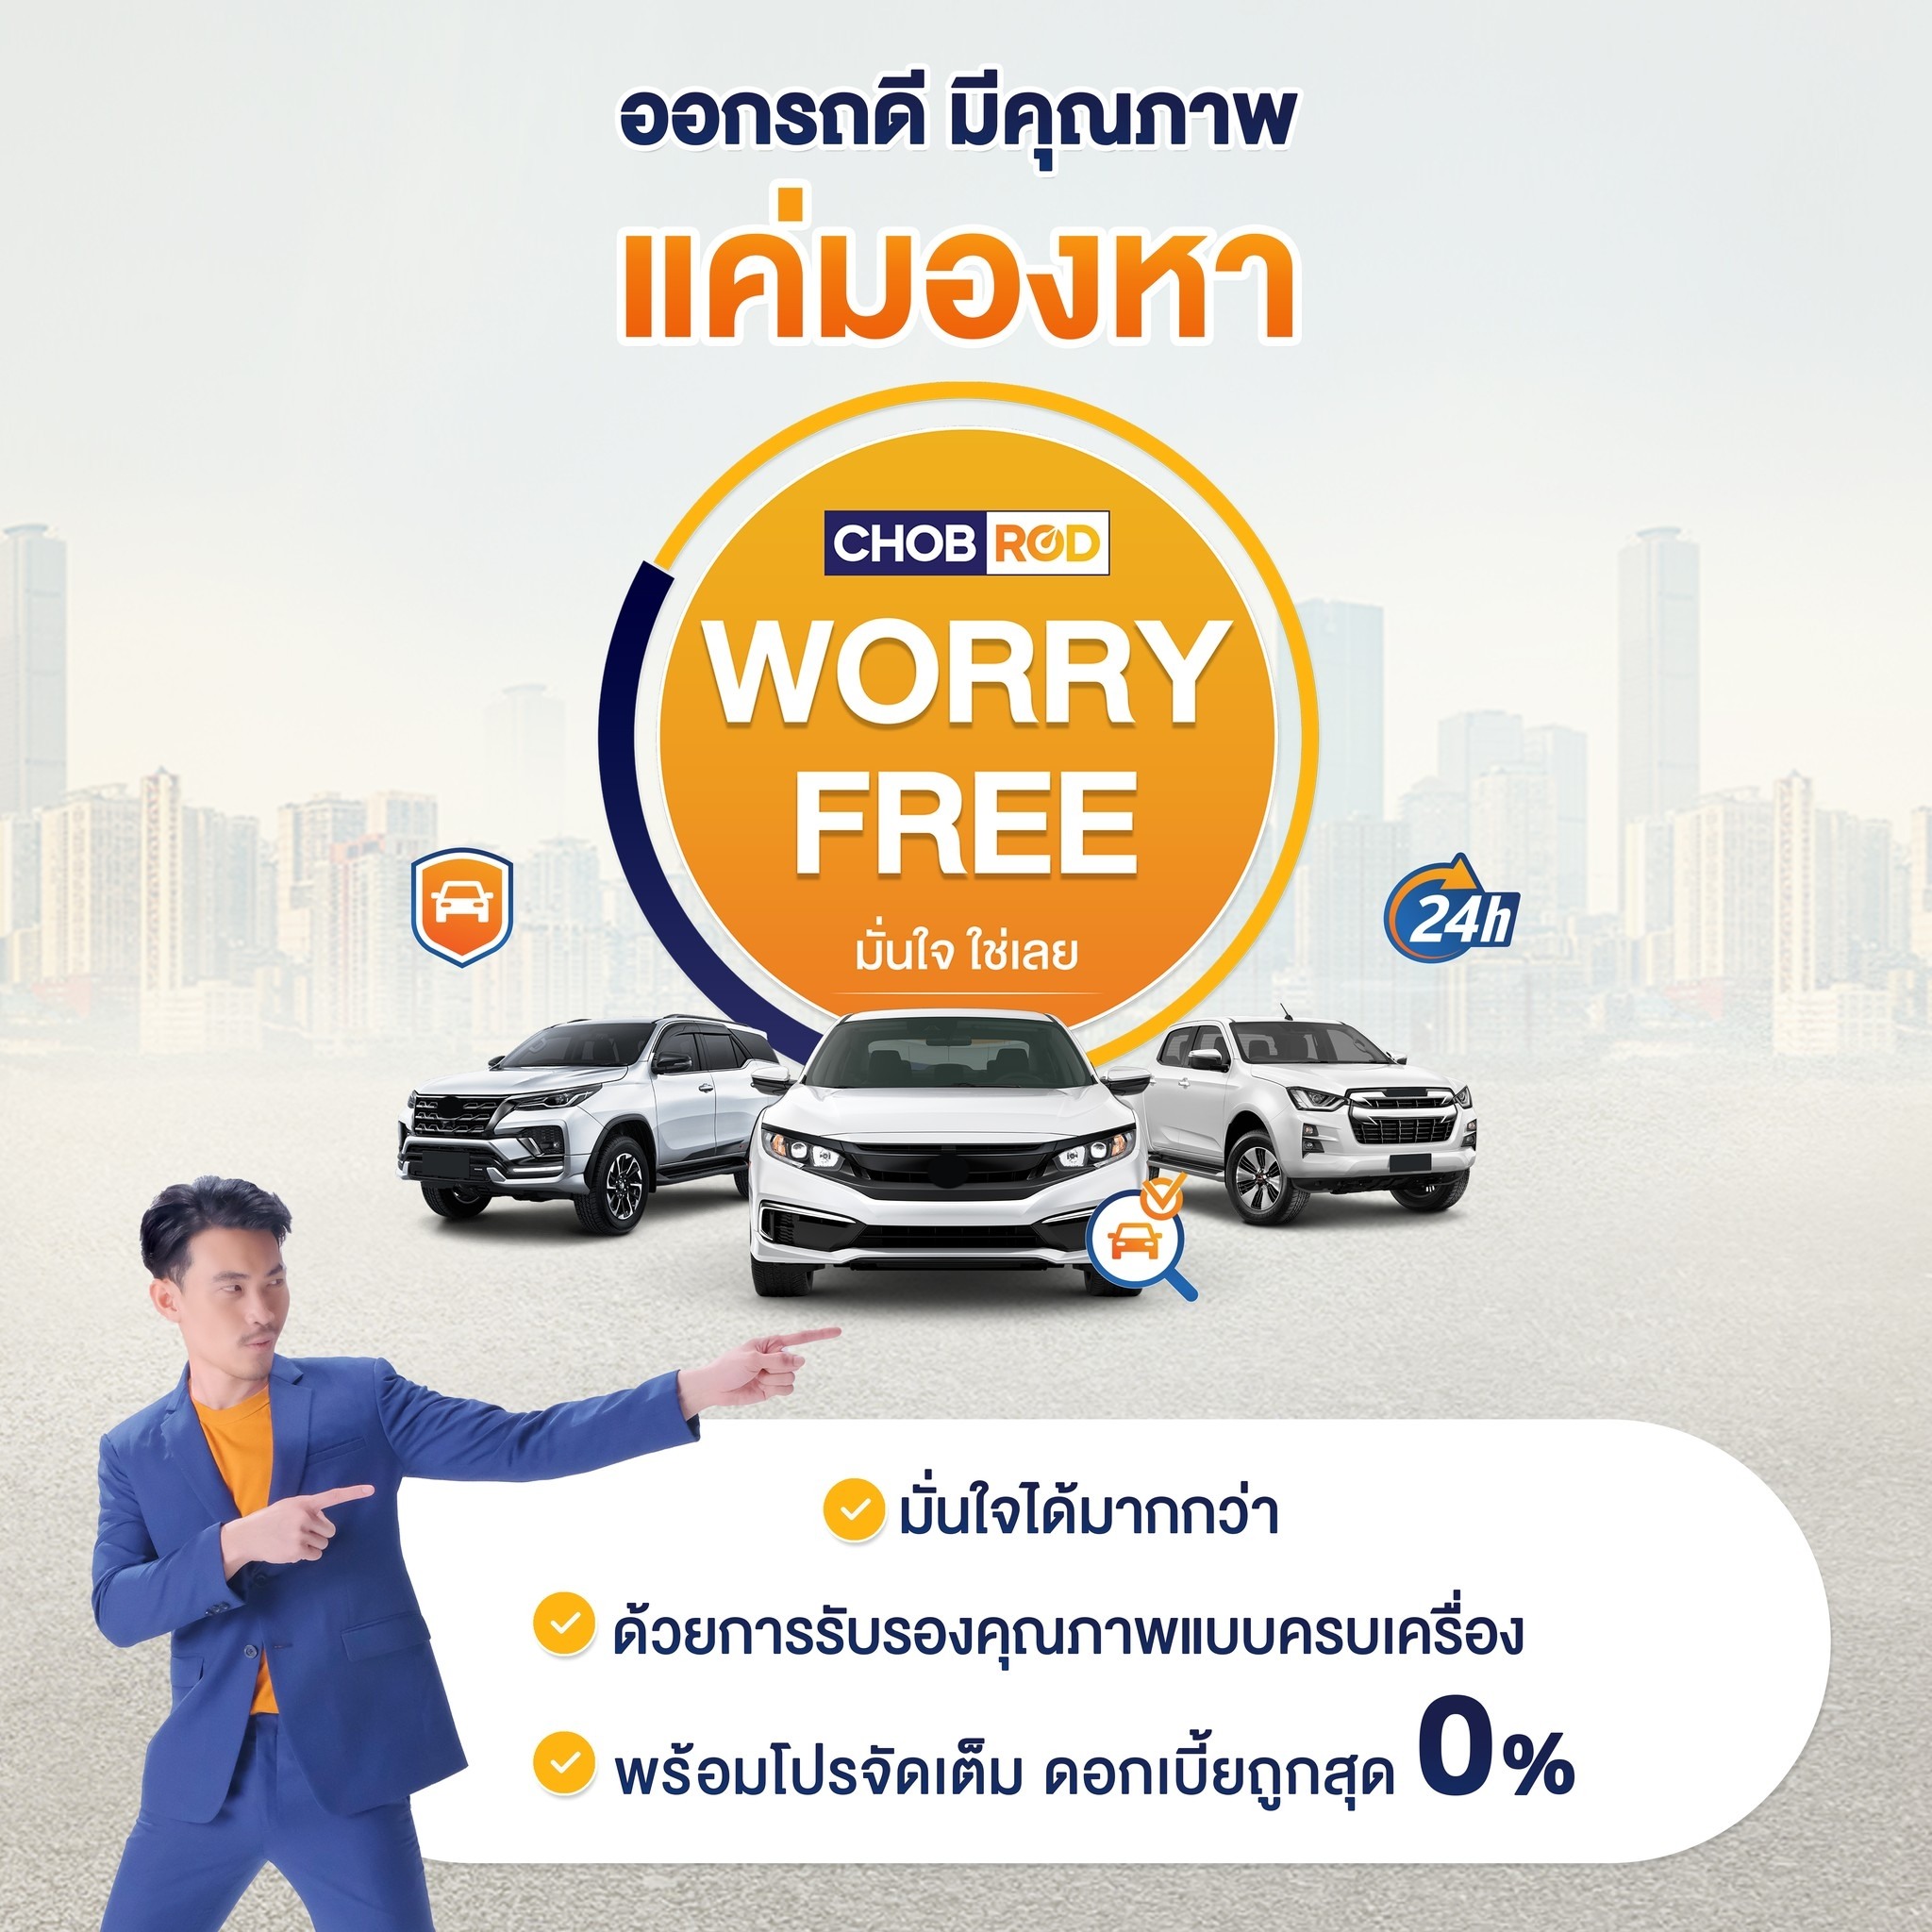 “CHOBROD WORRY FREE”, a new feature that makes buying-selling your used car easy, confident, worry-free.